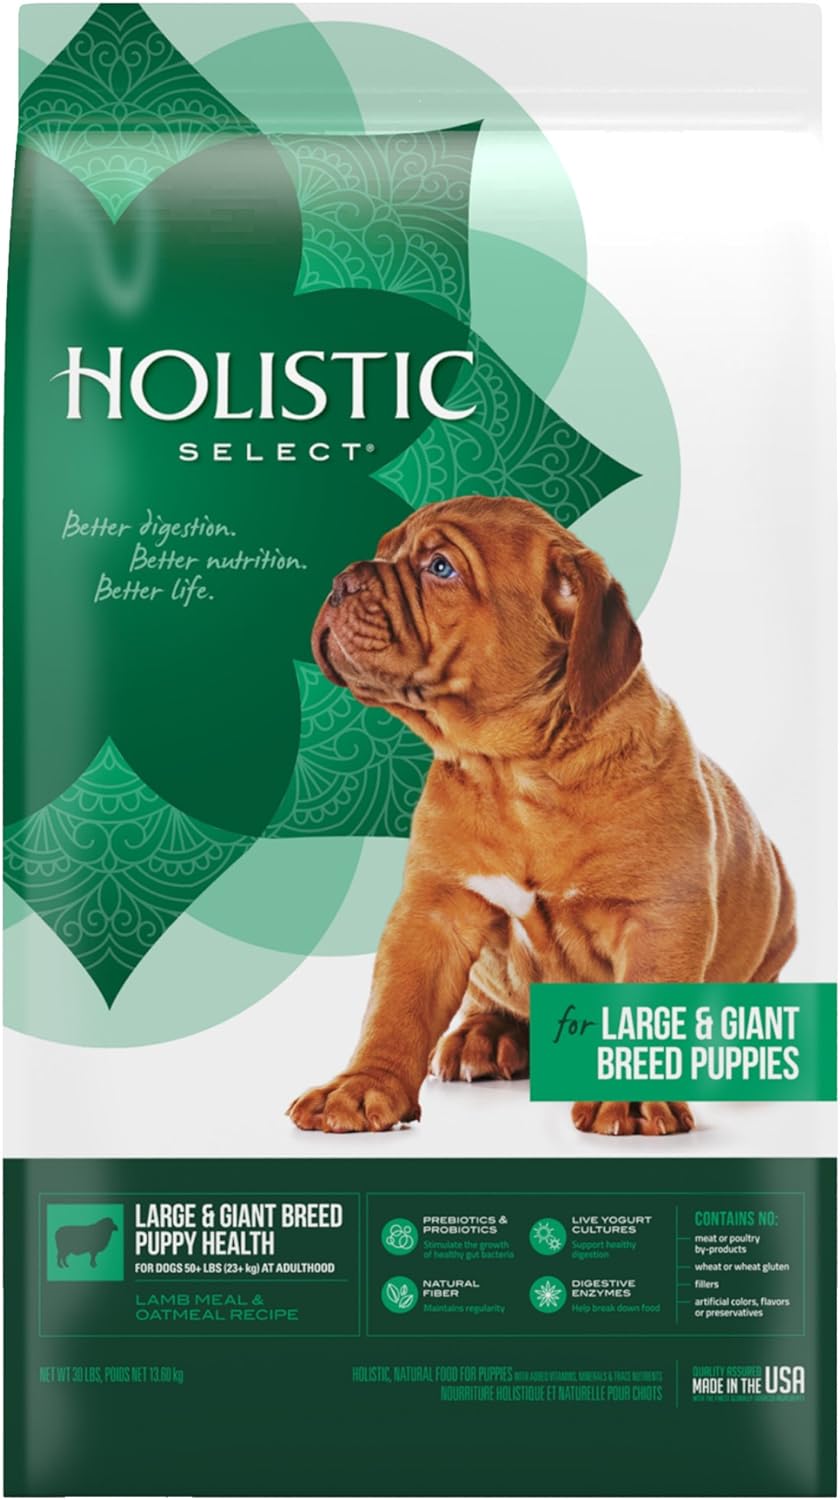 Holistic Select Large & Giant Breed Puppy Health Dry Dog Food – Gallery Image 1